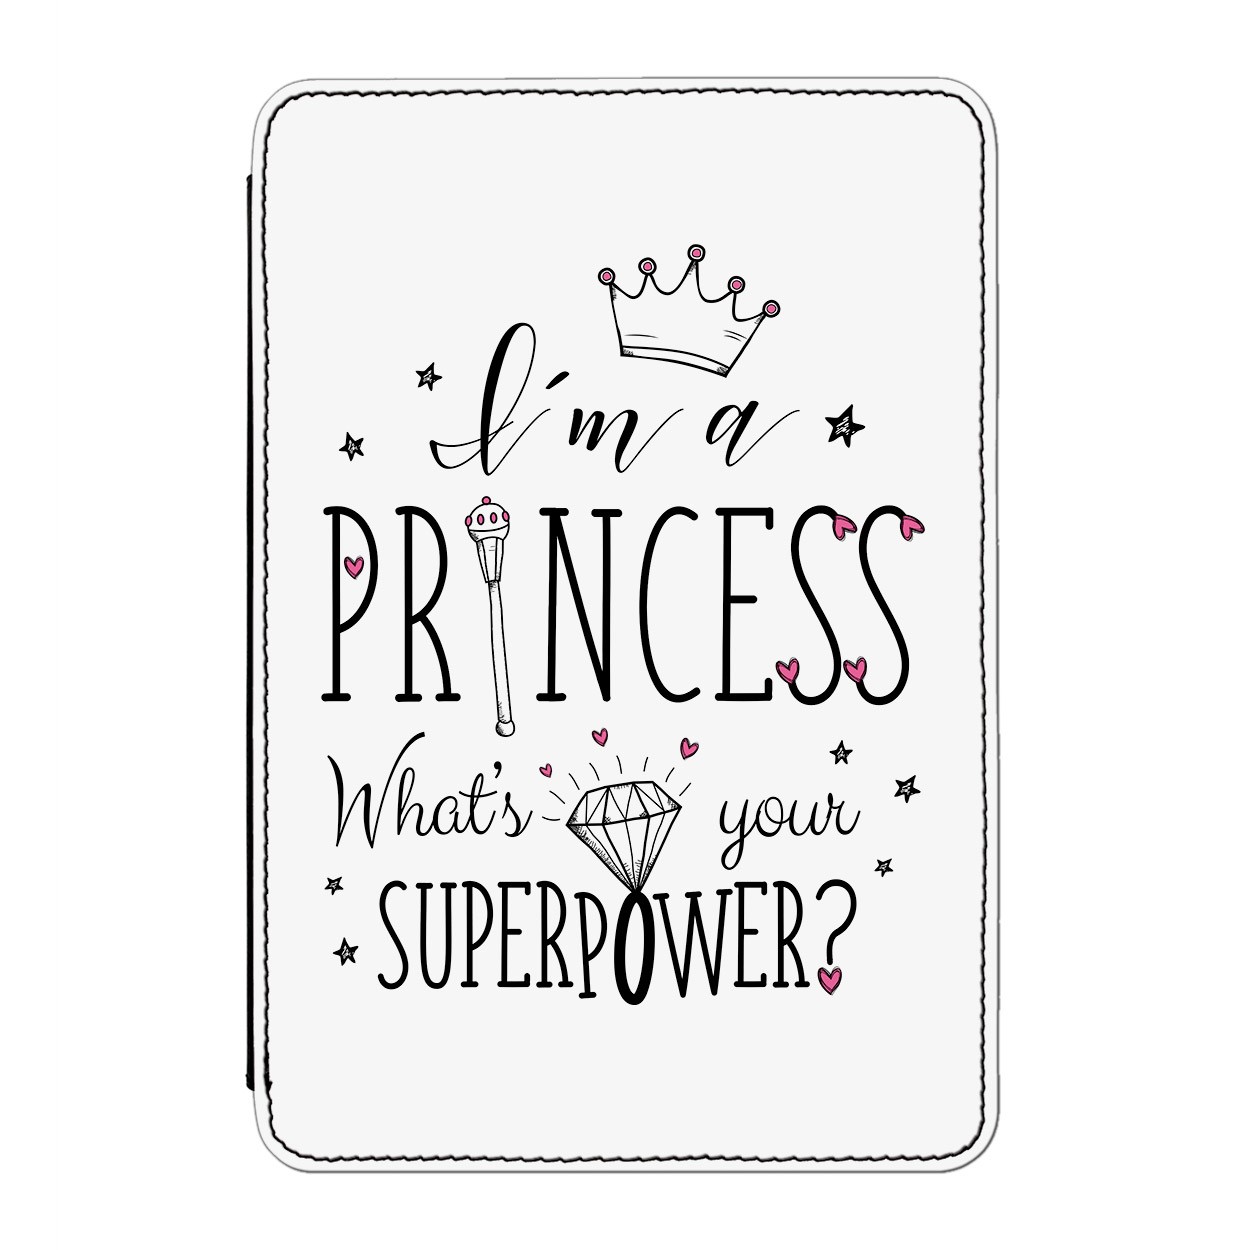 I'm A Princess What's Your Superpower Case Cover for Kindle 6" E-reader